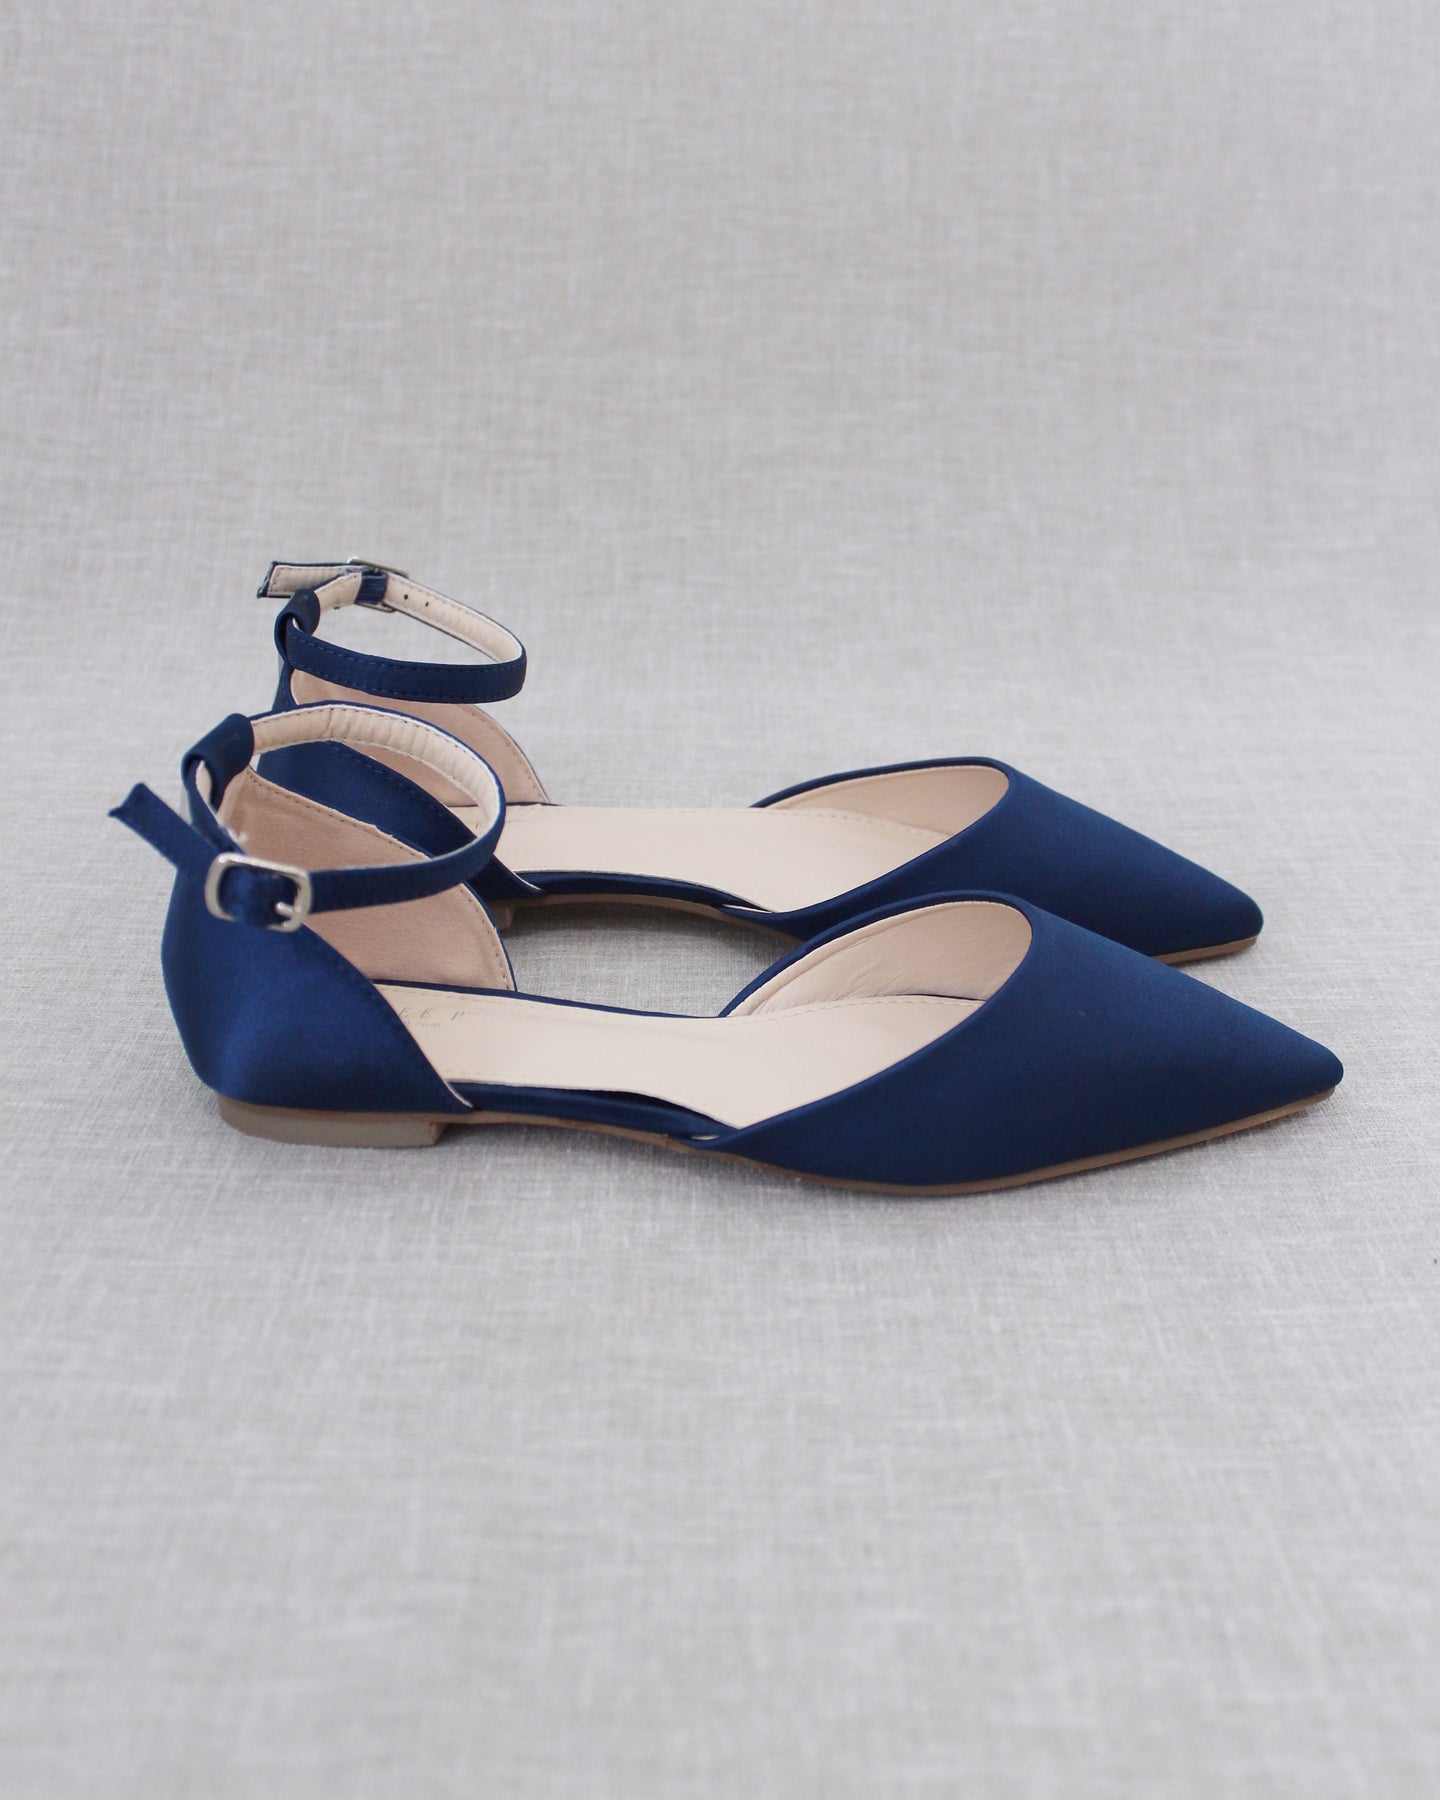 Navy Satin Pointy Toe Flats with Ankle Strap - Wedding Shoes, Bridal ...